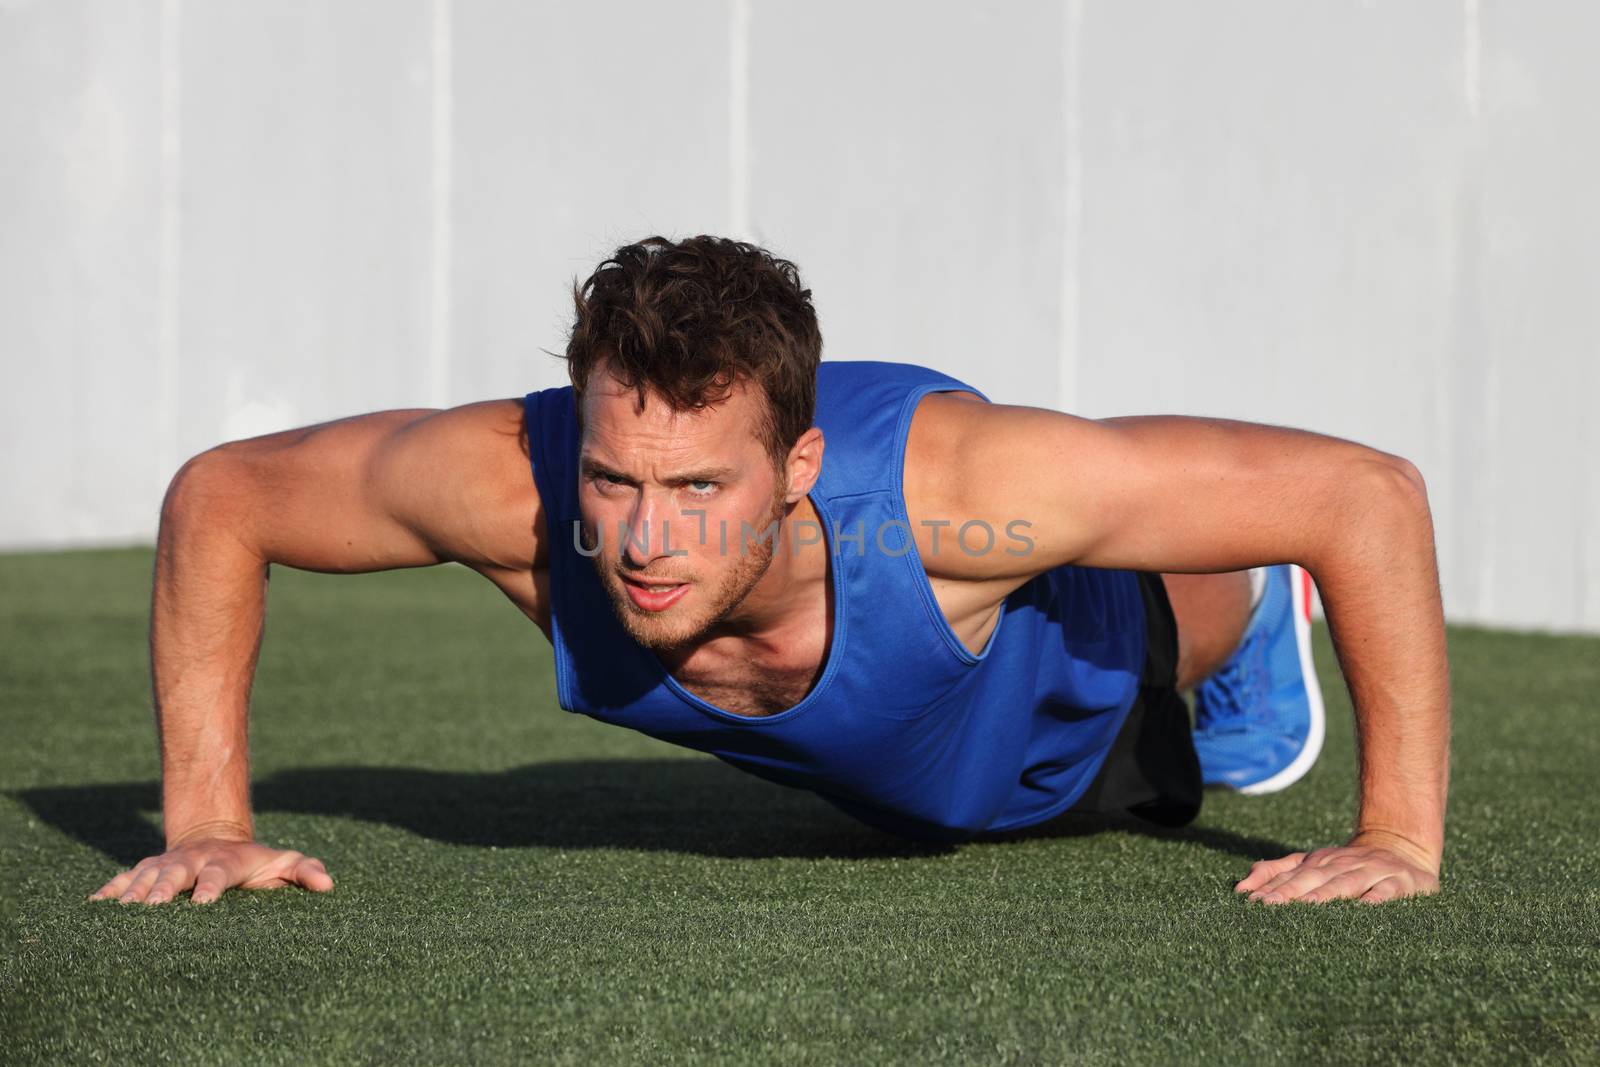 Push ups - fitness man exercising outside doing pushups. Male fitness instructor doing Push Ups on stadium grass at outdoor gym center.